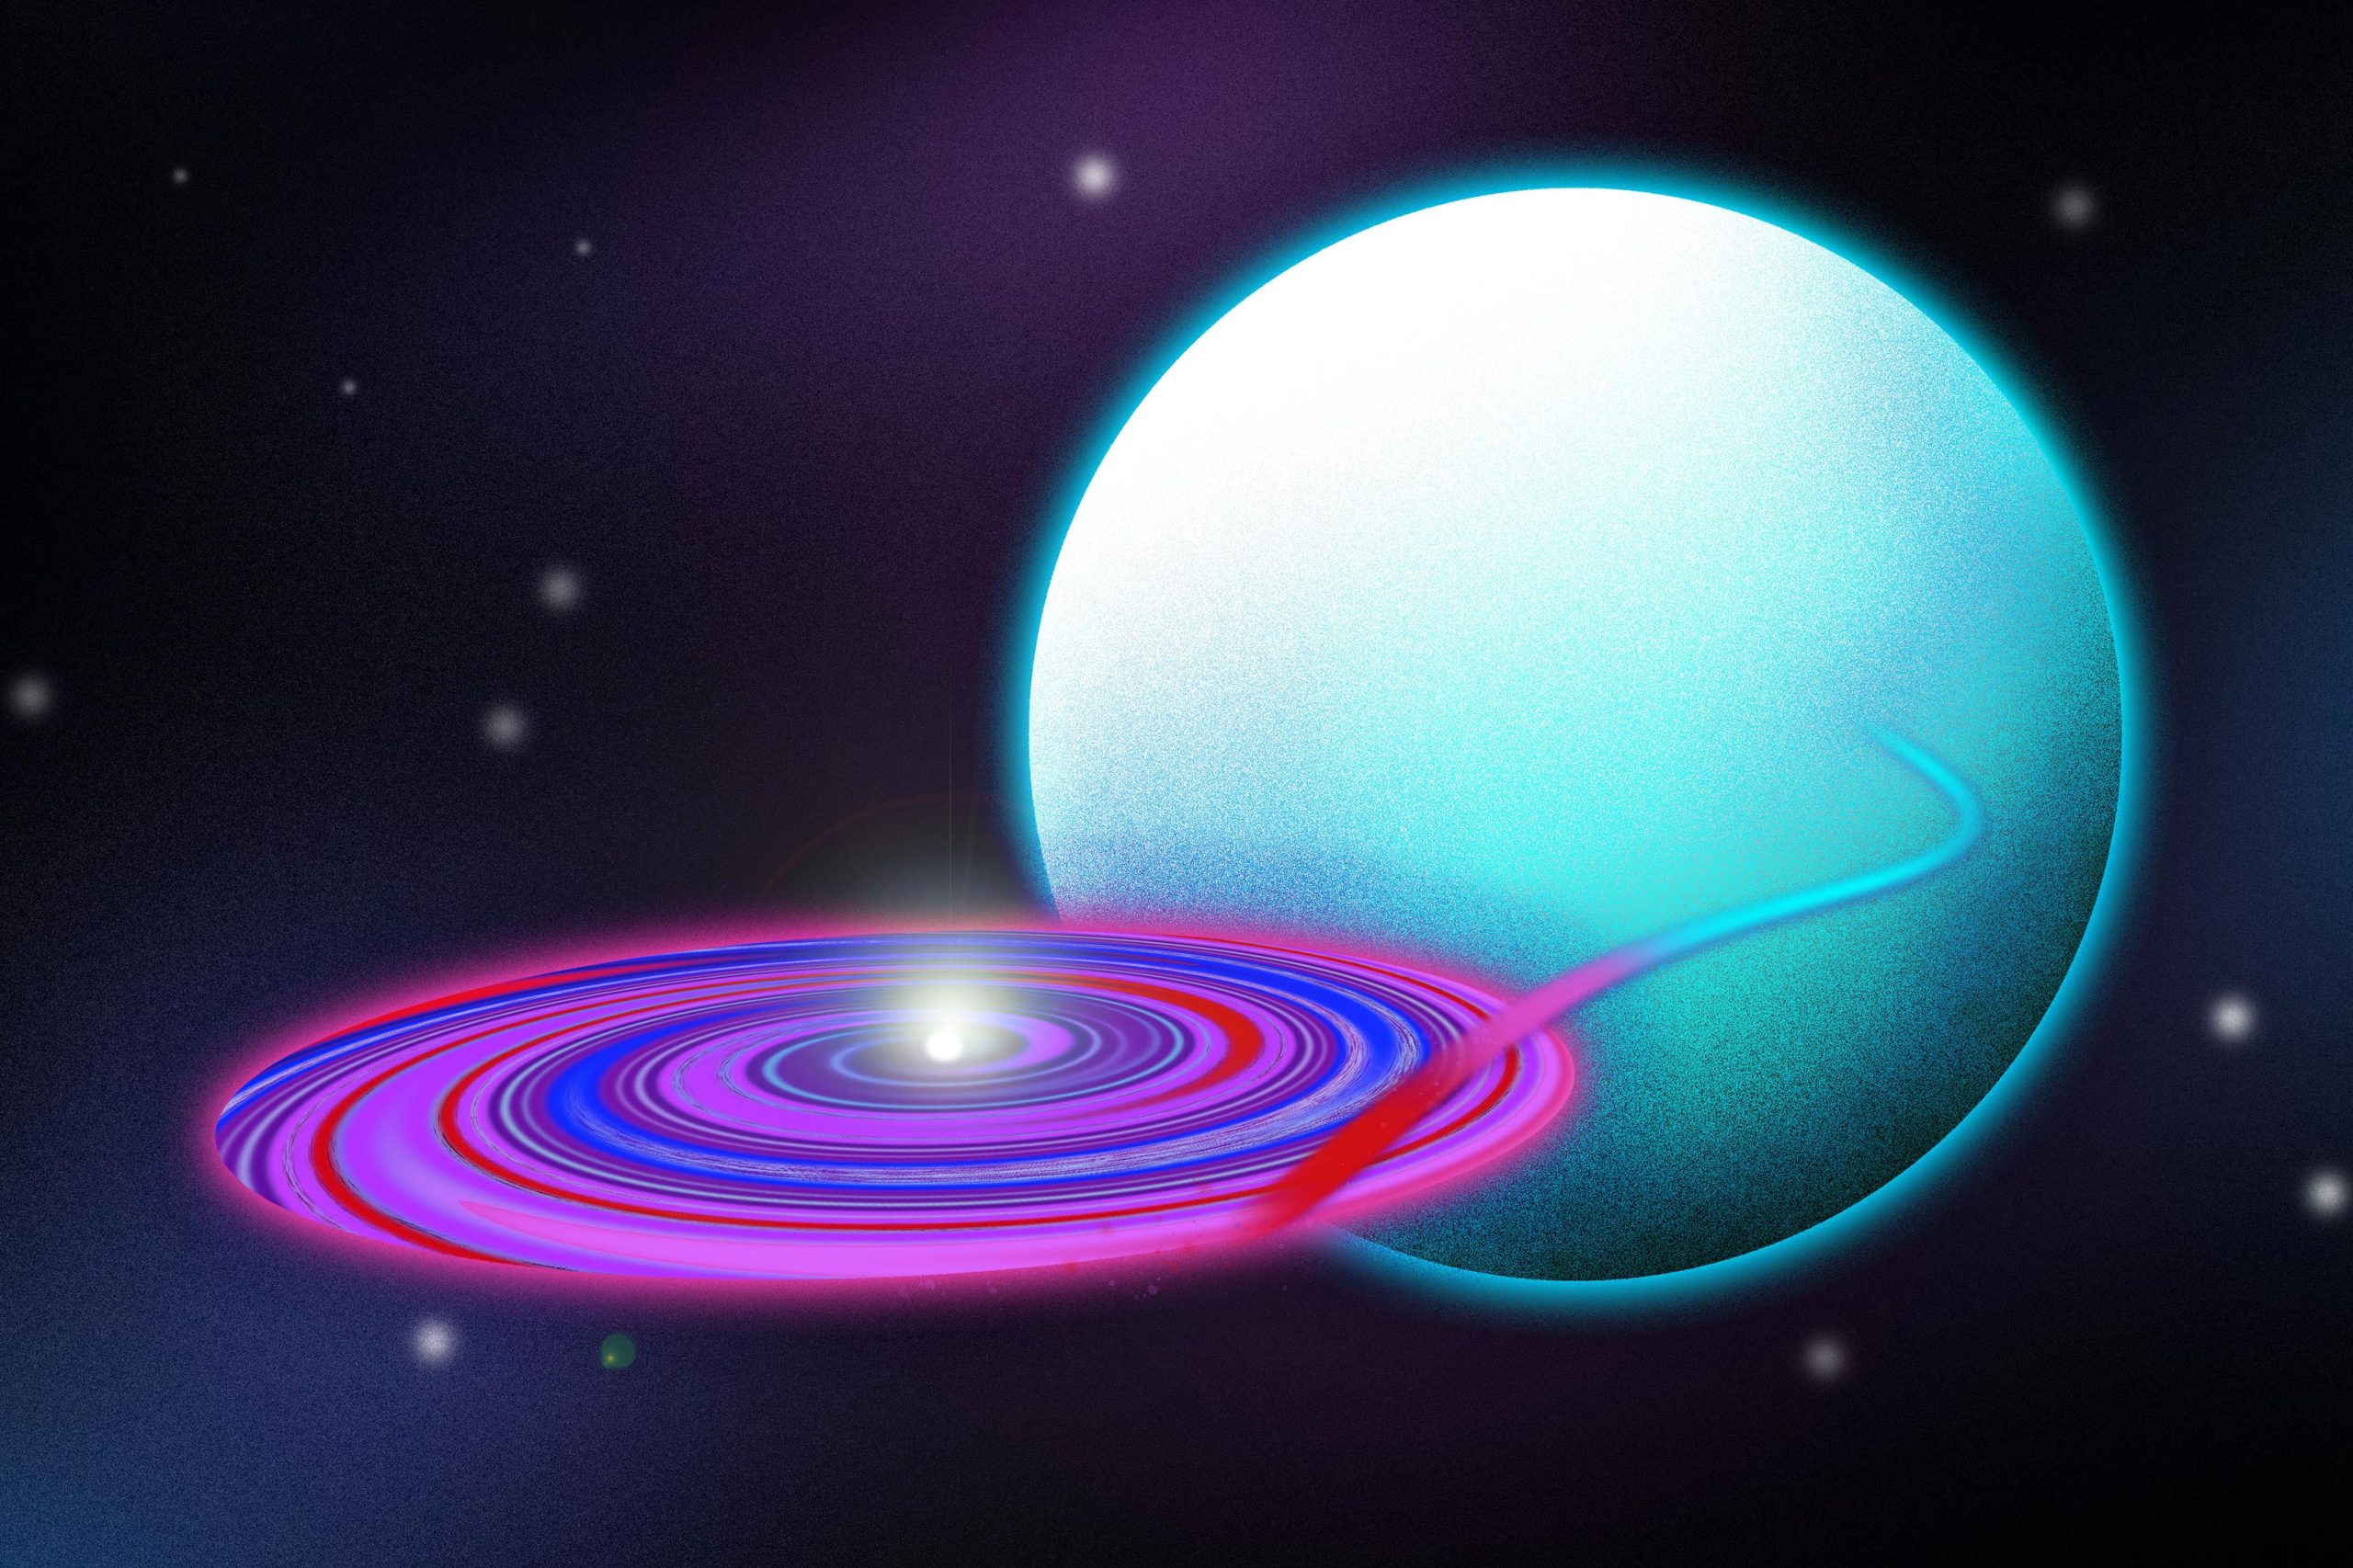 MIT astronomers map “disk winds” in a distant neutron star system